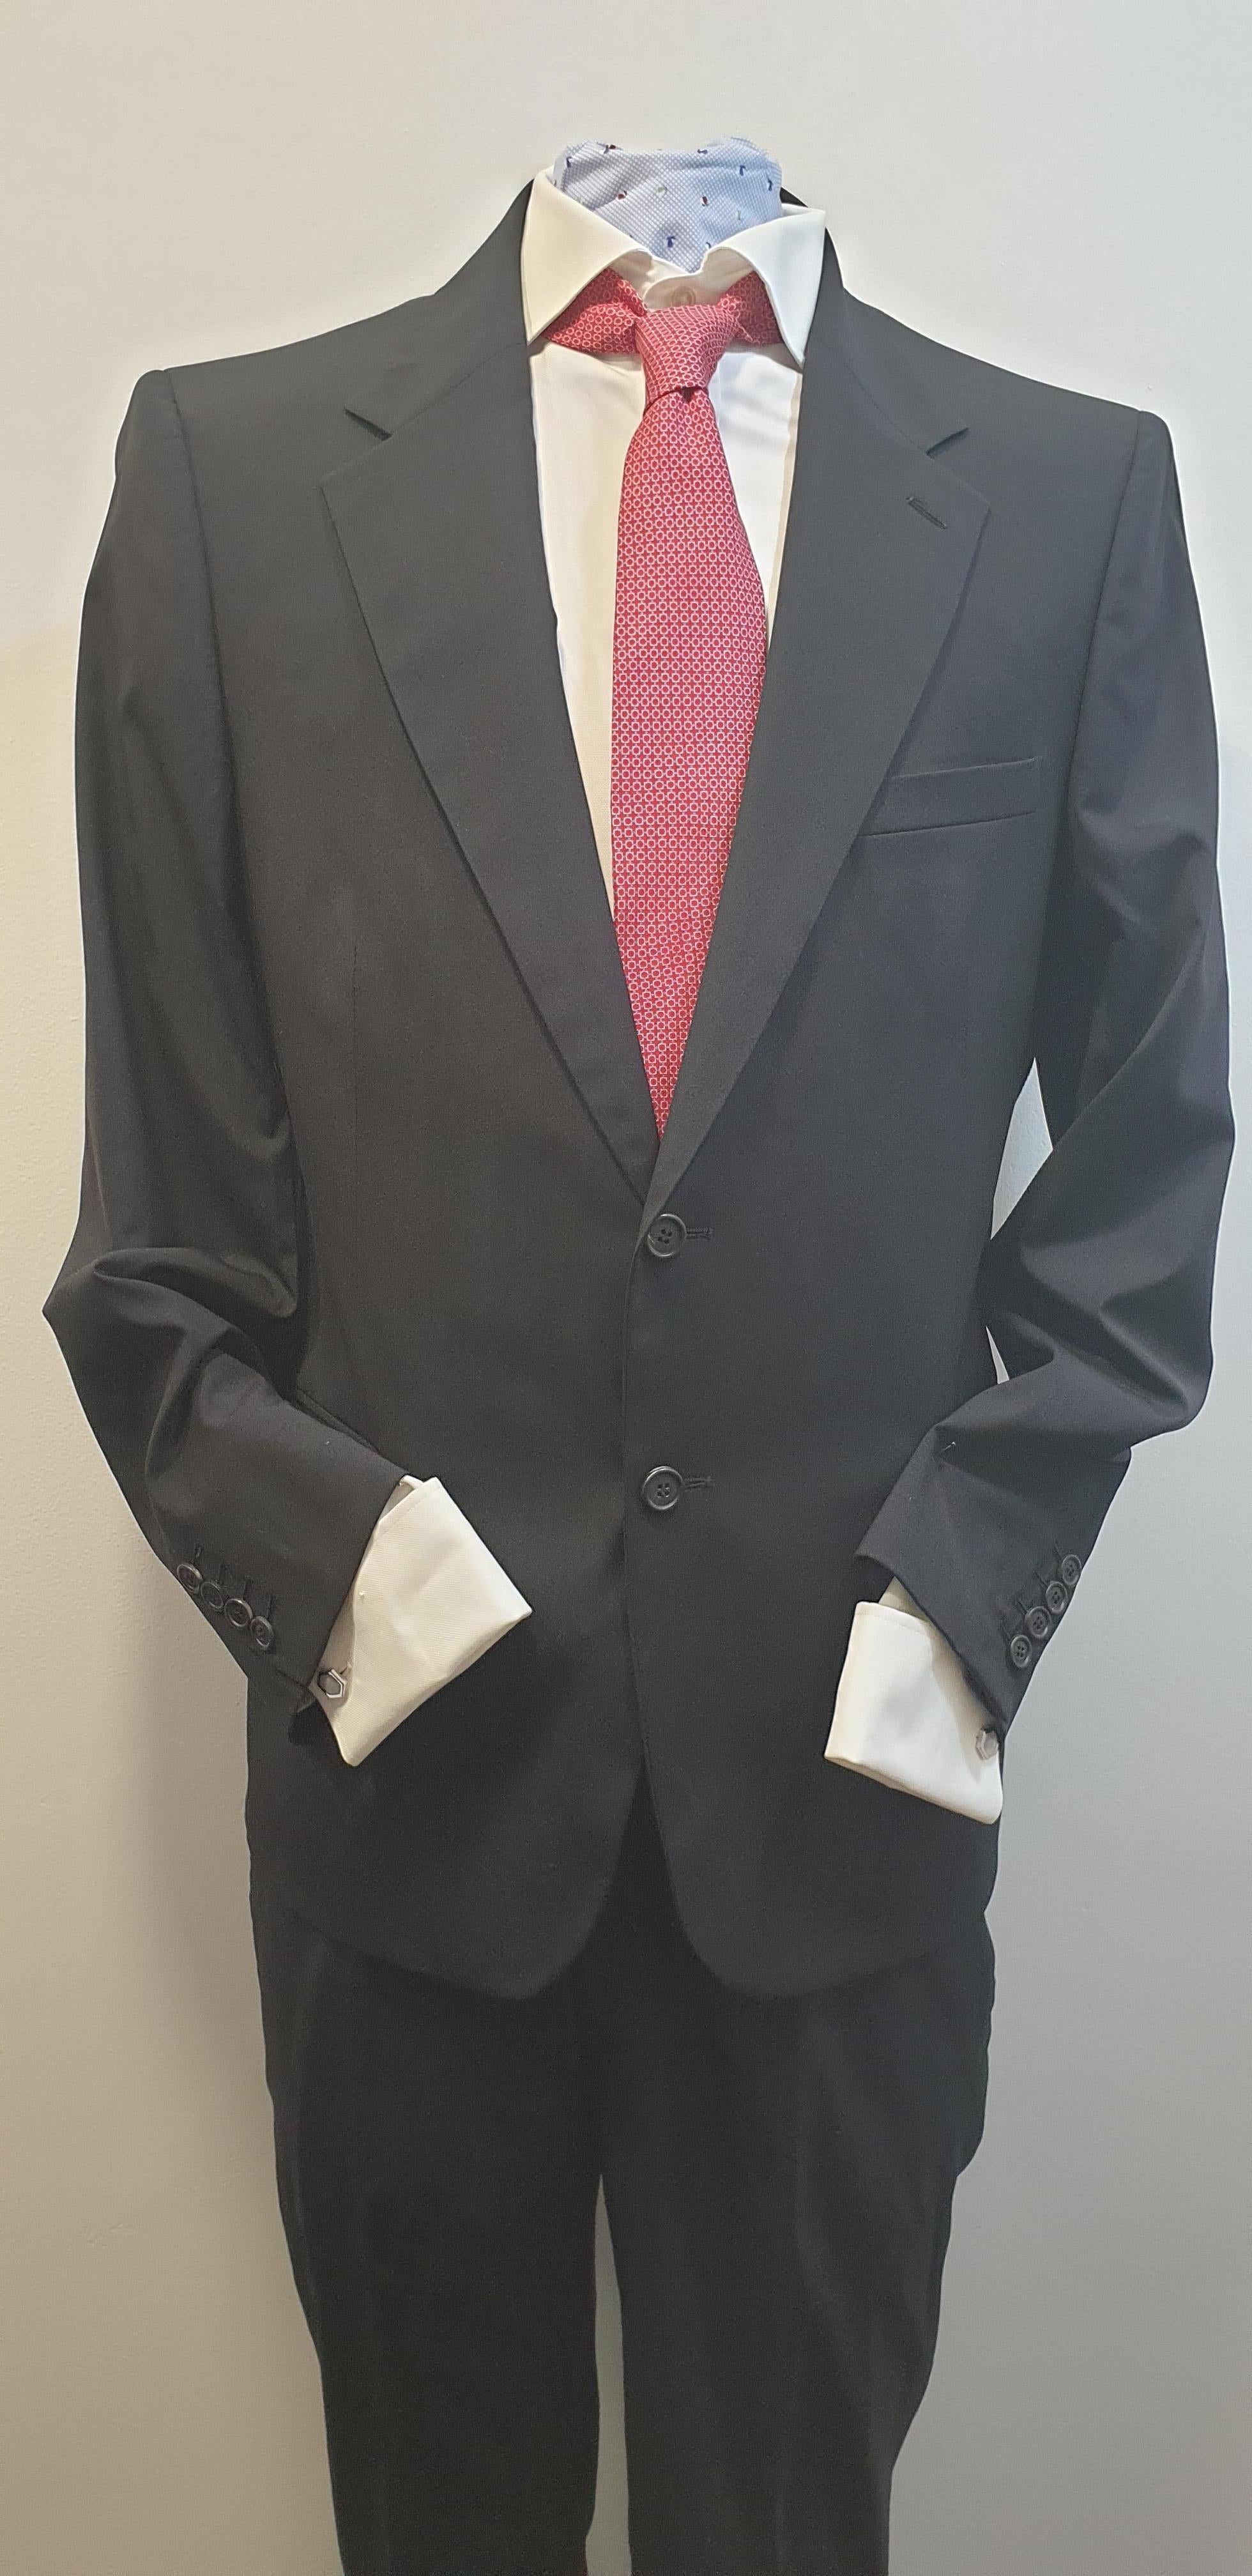 Classic and confortable PRADA suit for man 
Size 54R

READY TO SHIP *Shipment of this piece is not affected by COVID-19. Orders welcome!* 

Pradera Fashion Division  is specialized in European Fashion designers, clothing, handbags, accessories and